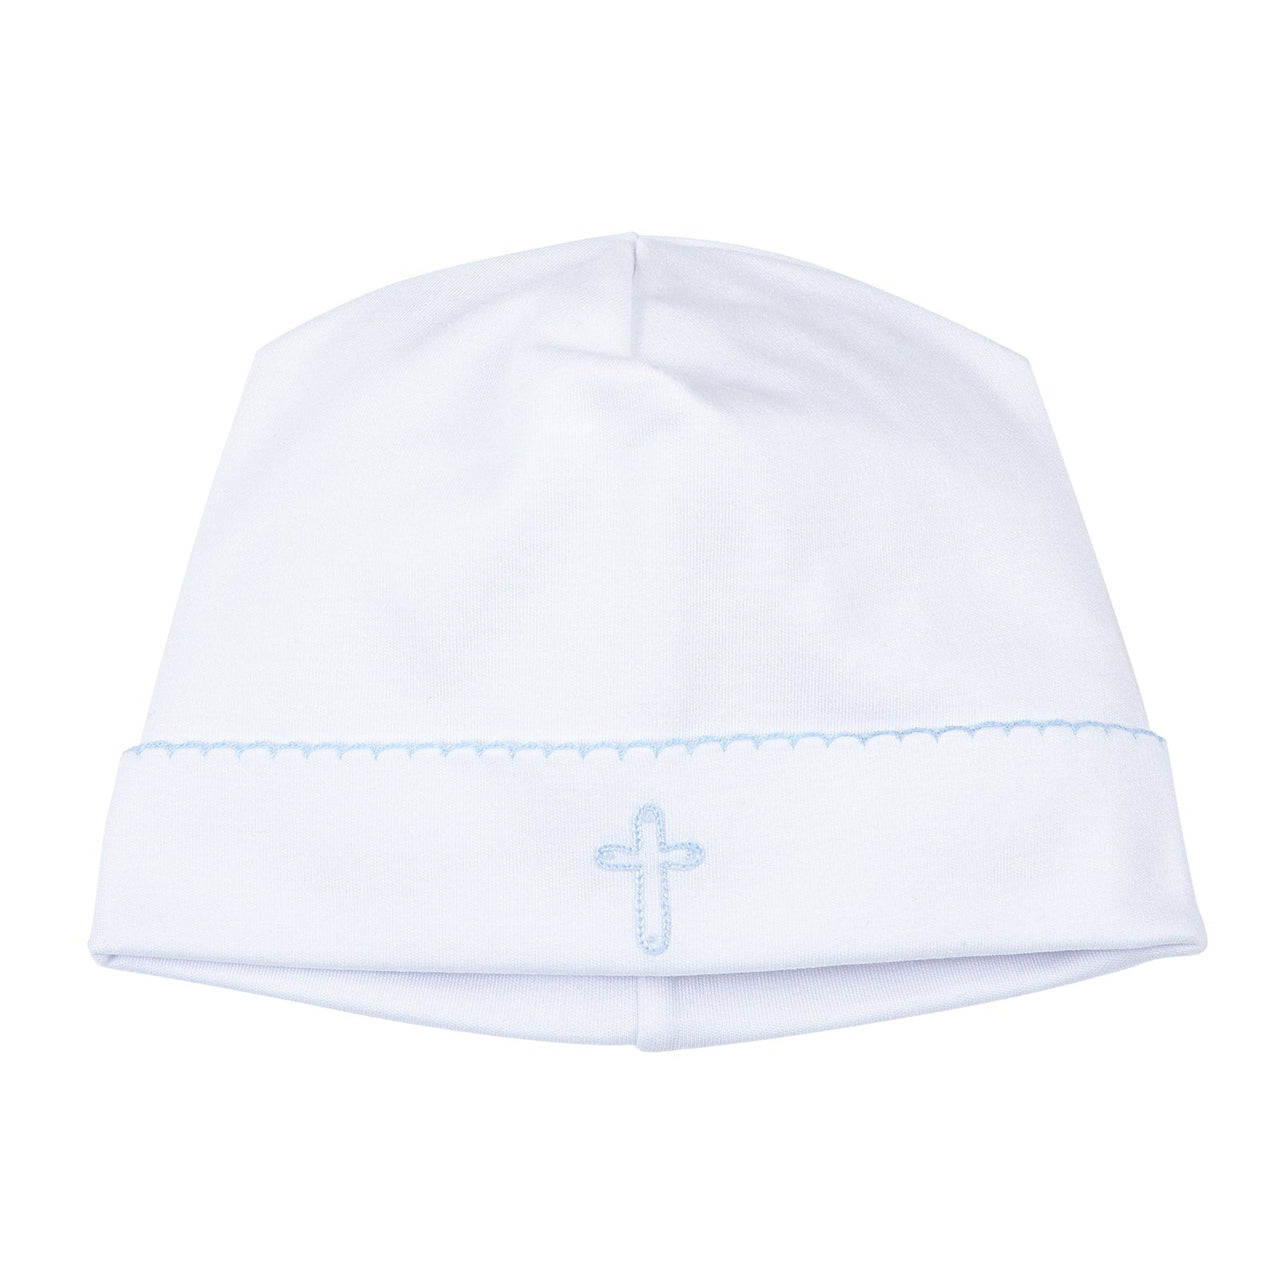 Magnolia Baby Blessed Spring 24 Emb Hat 1312-50 5102